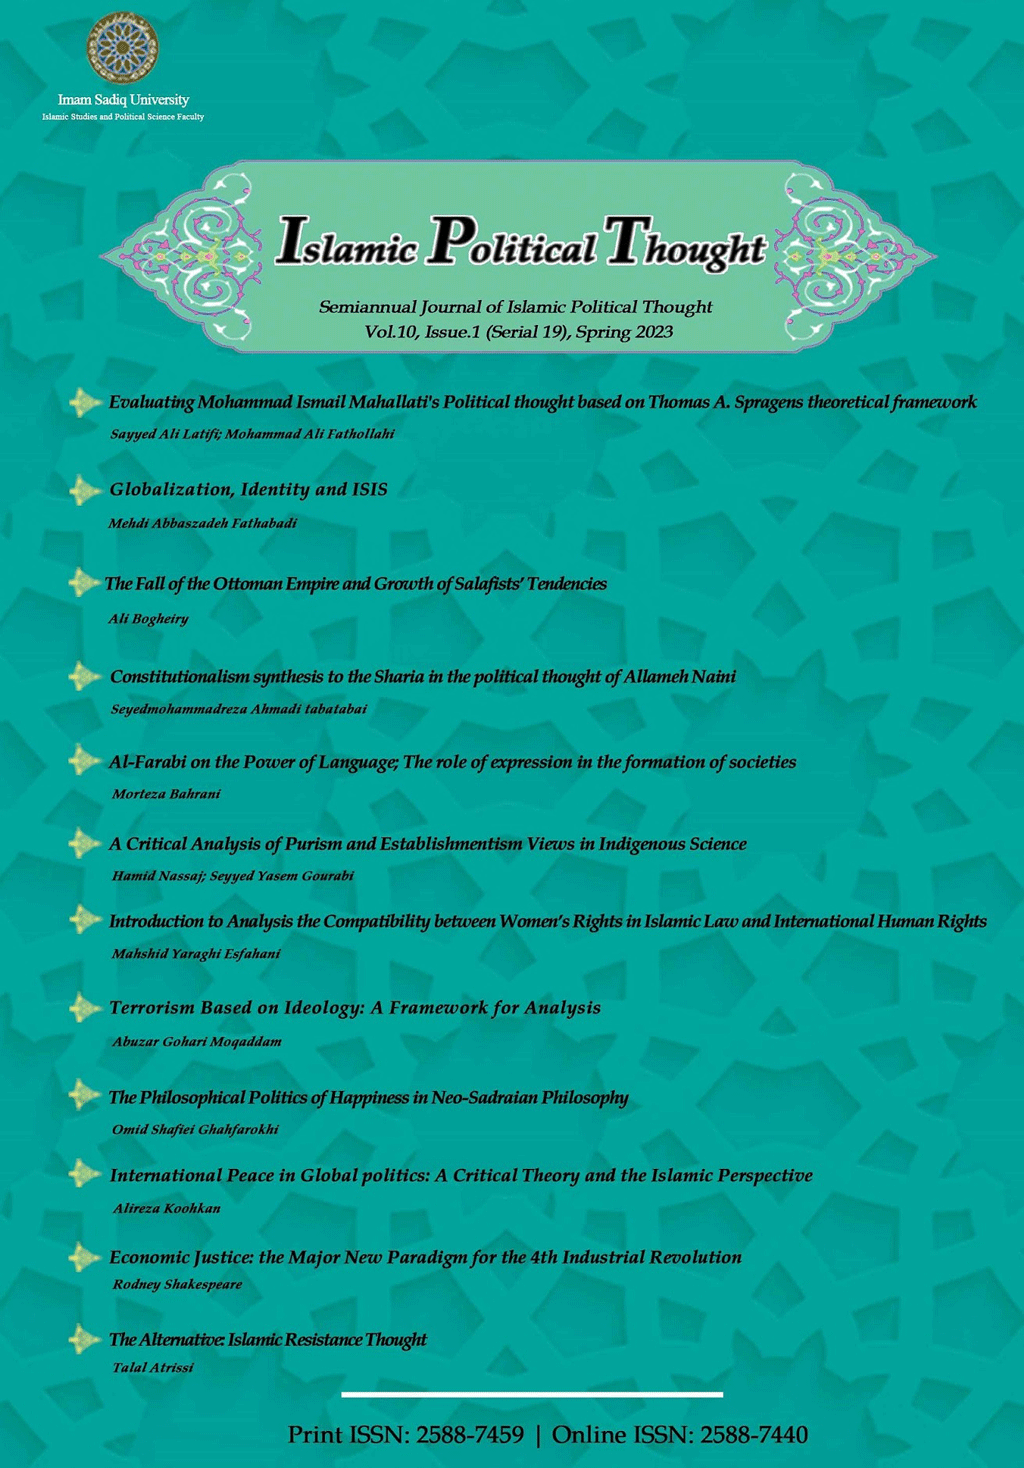 Islamic Political Thoughts - Fall 2019,  Volume 6 - Number 2